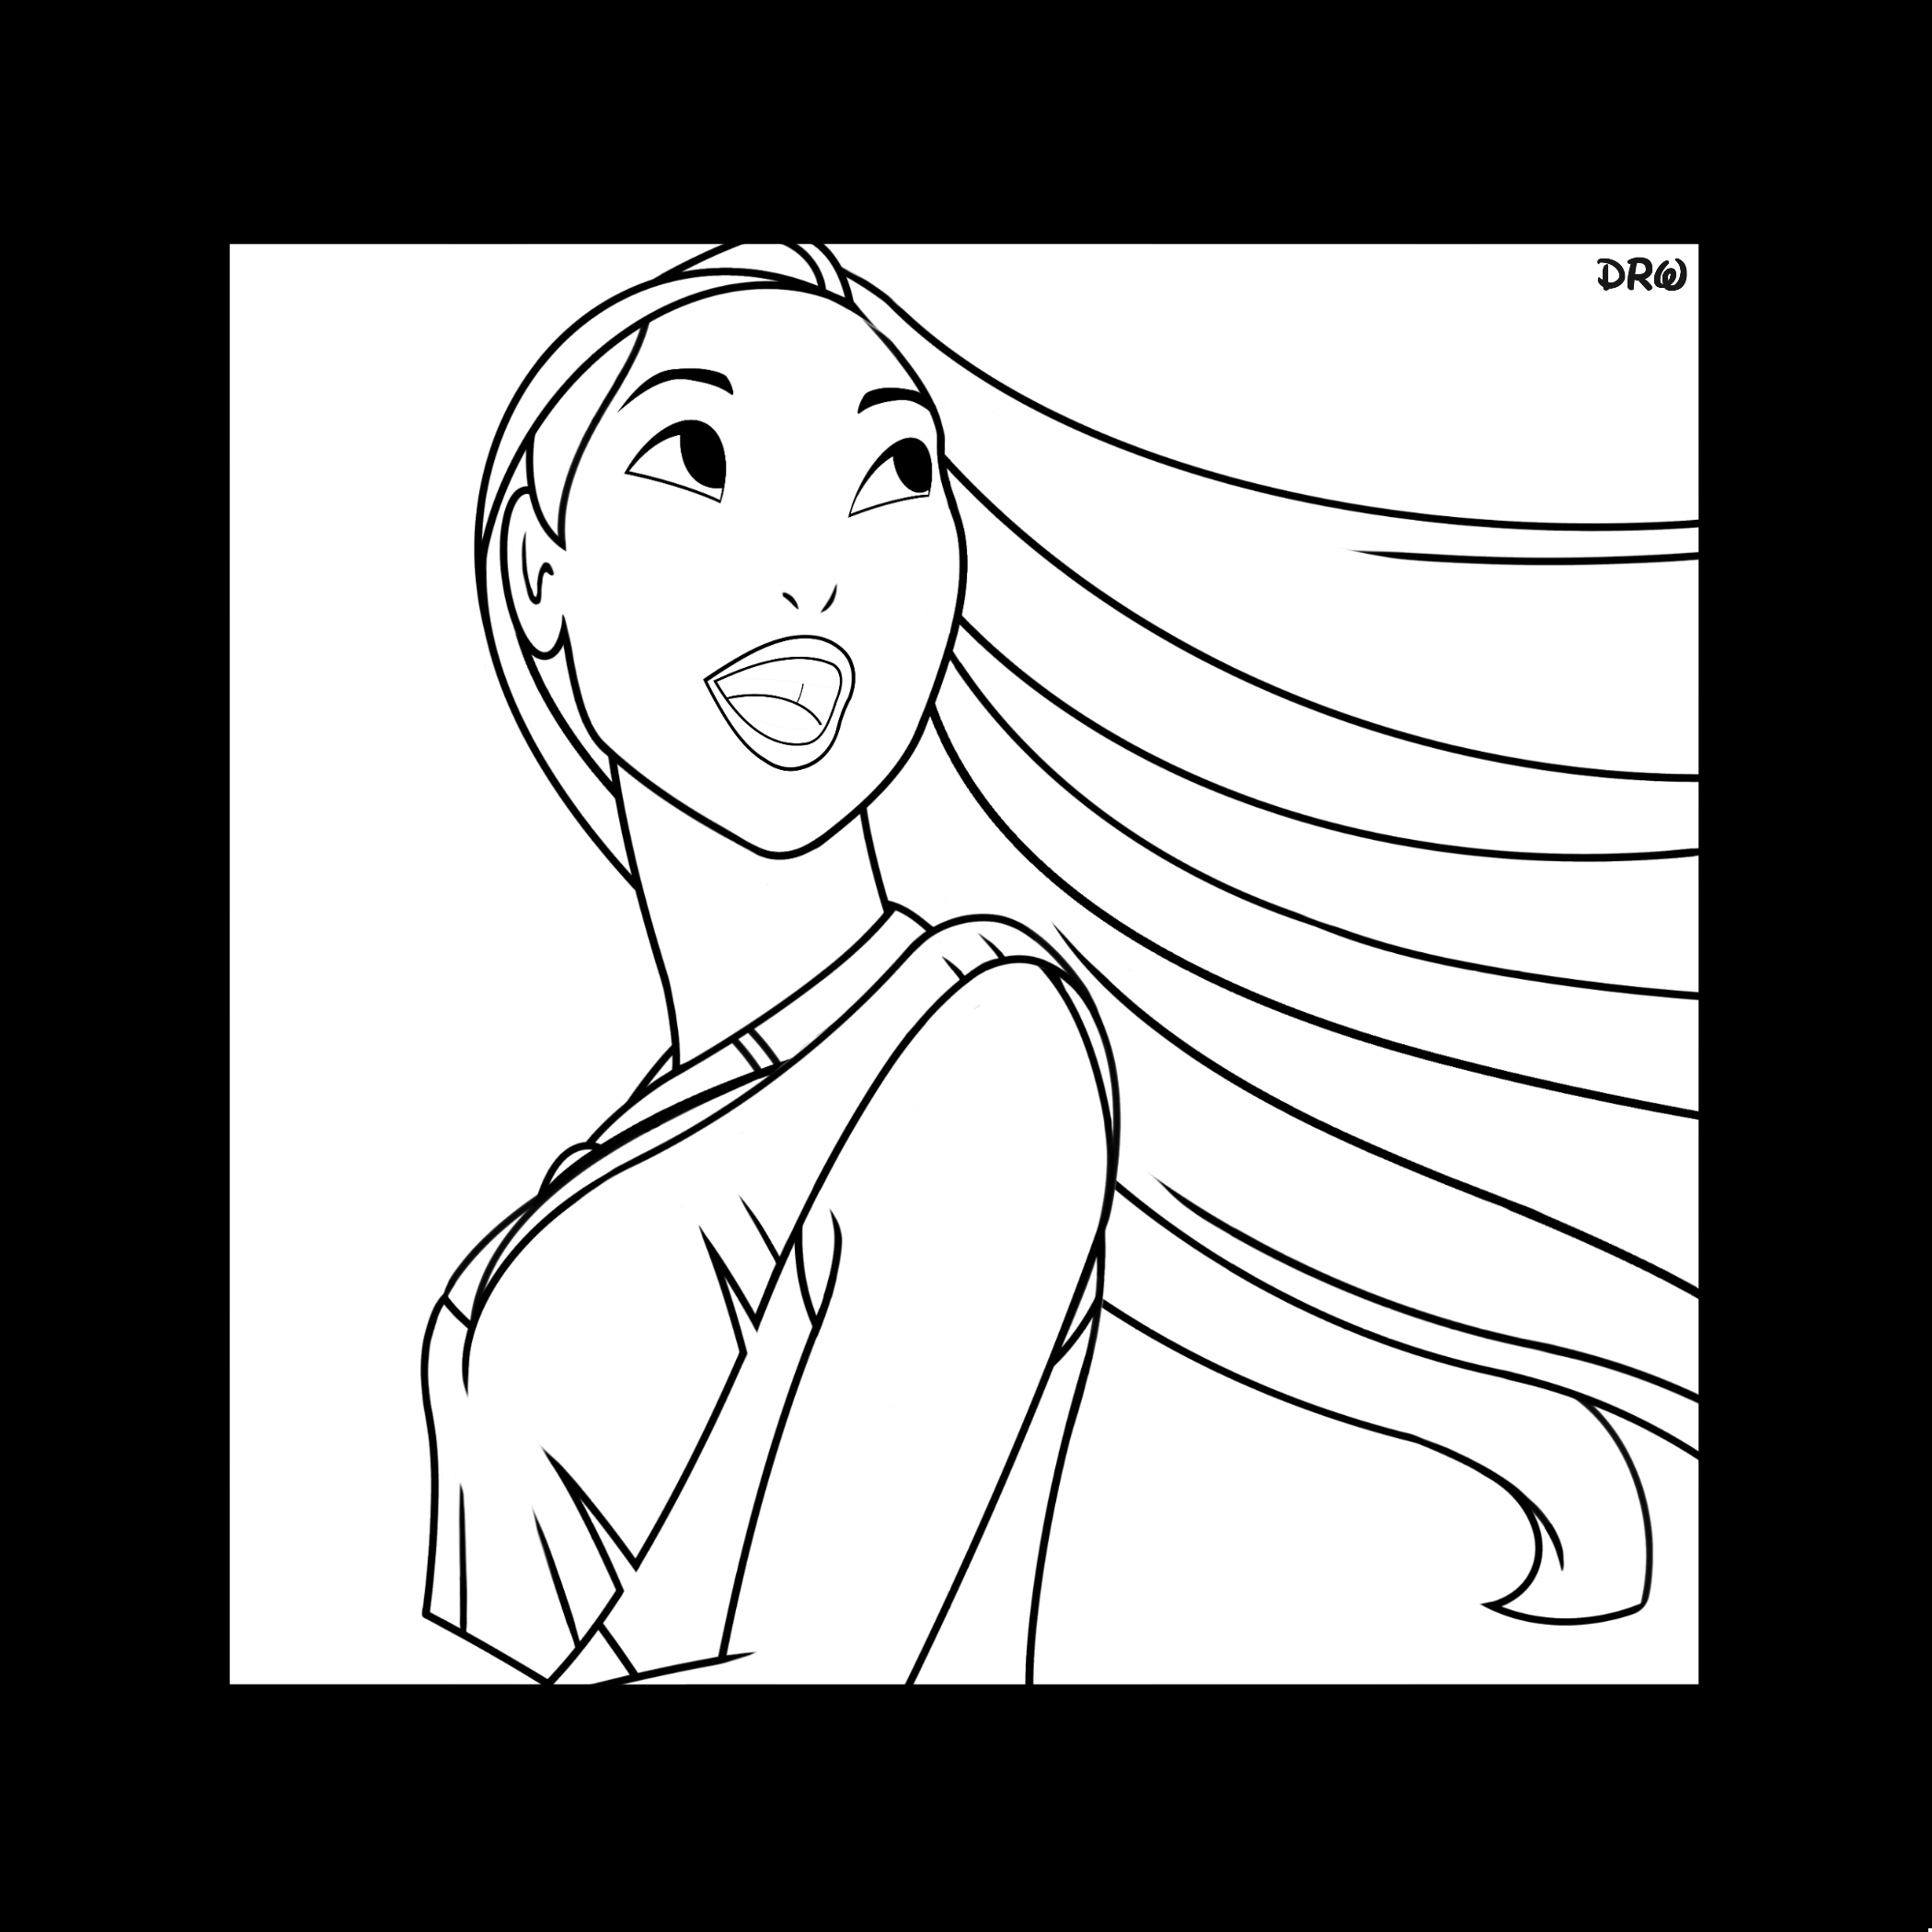 Coloring Page   Pocahontas by DisneyRebelWorks on DeviantArt